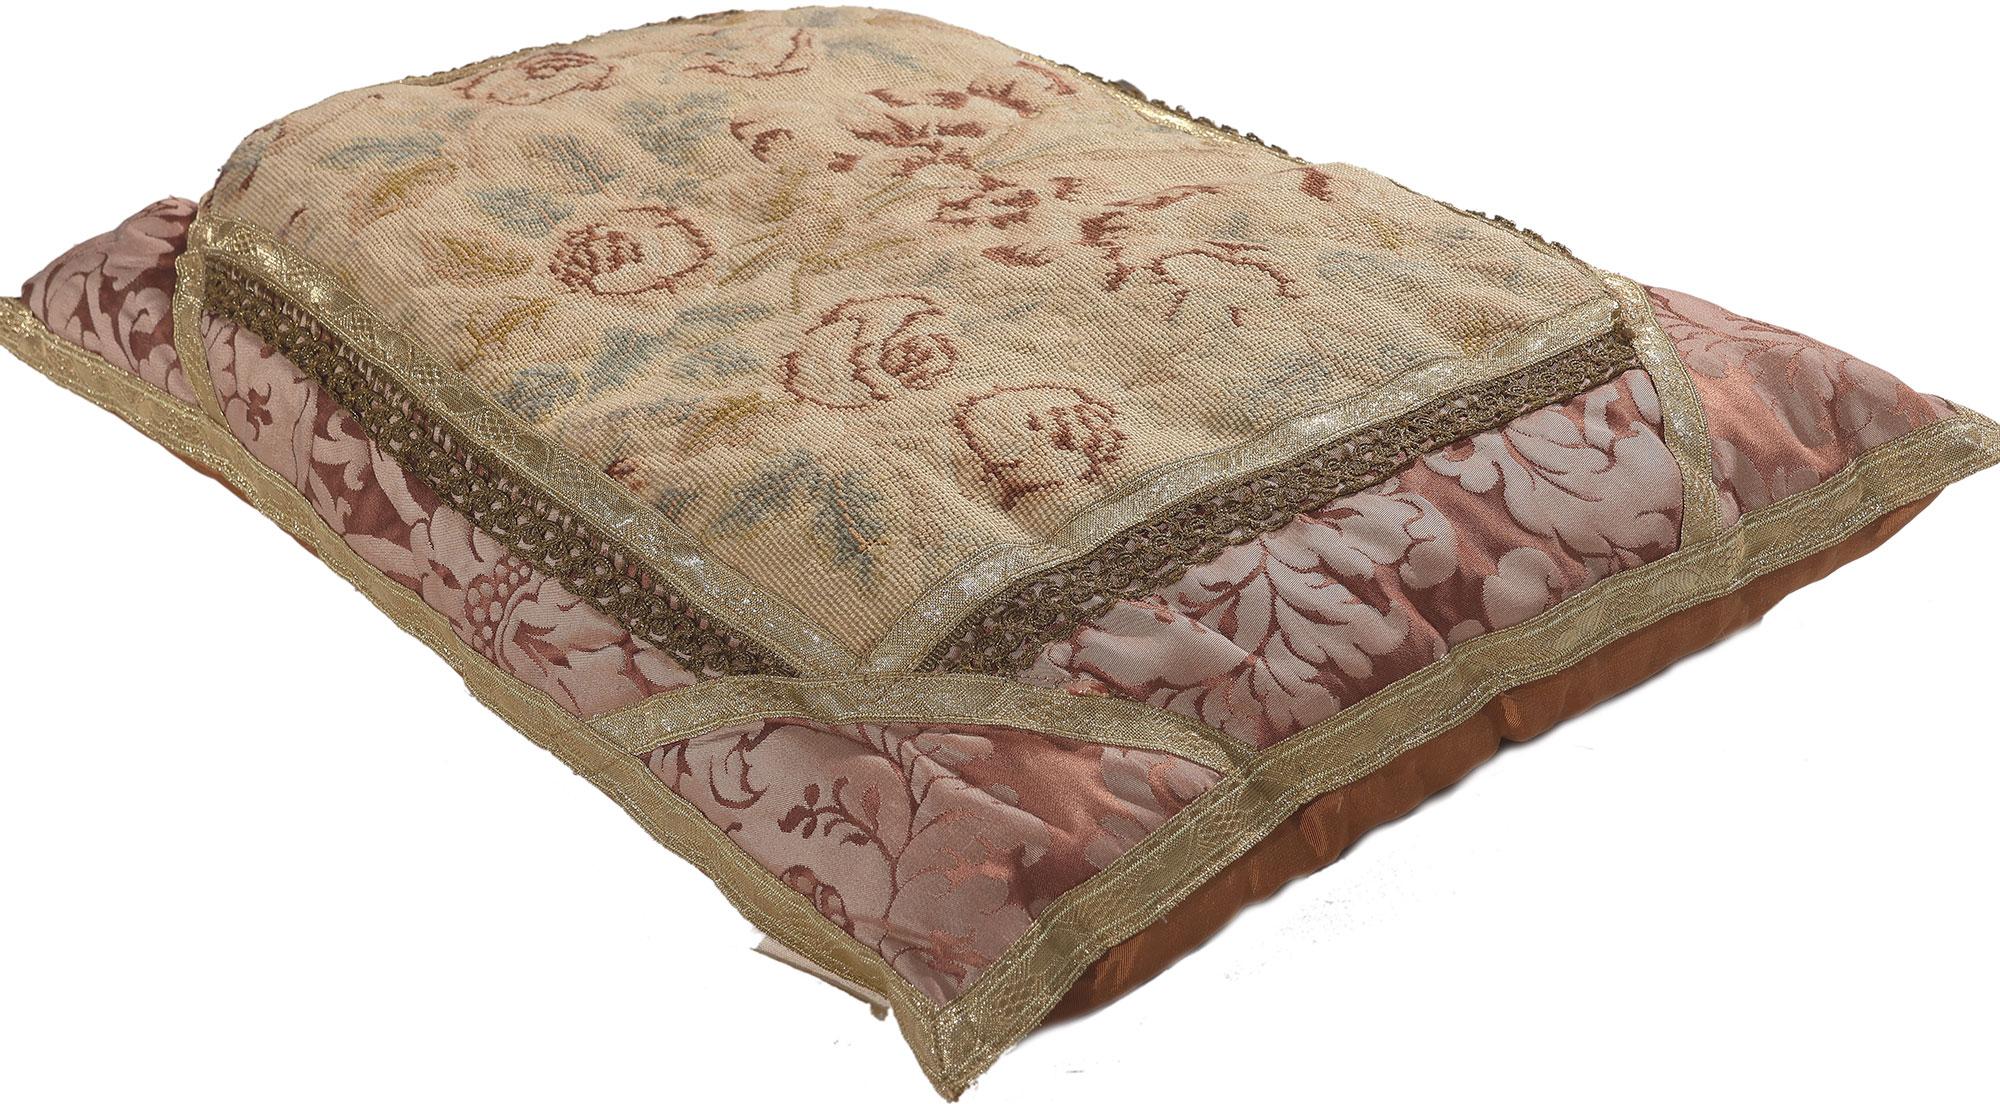 78621 Antique French Aubusson Pillow, 02'00 x 01'05.
Emulating French Romanticism with incredible detail and texture, this handwoven antique Aubusson pillow is a captivating vision of woven beauty. The intricate rose design and soft earthy colors